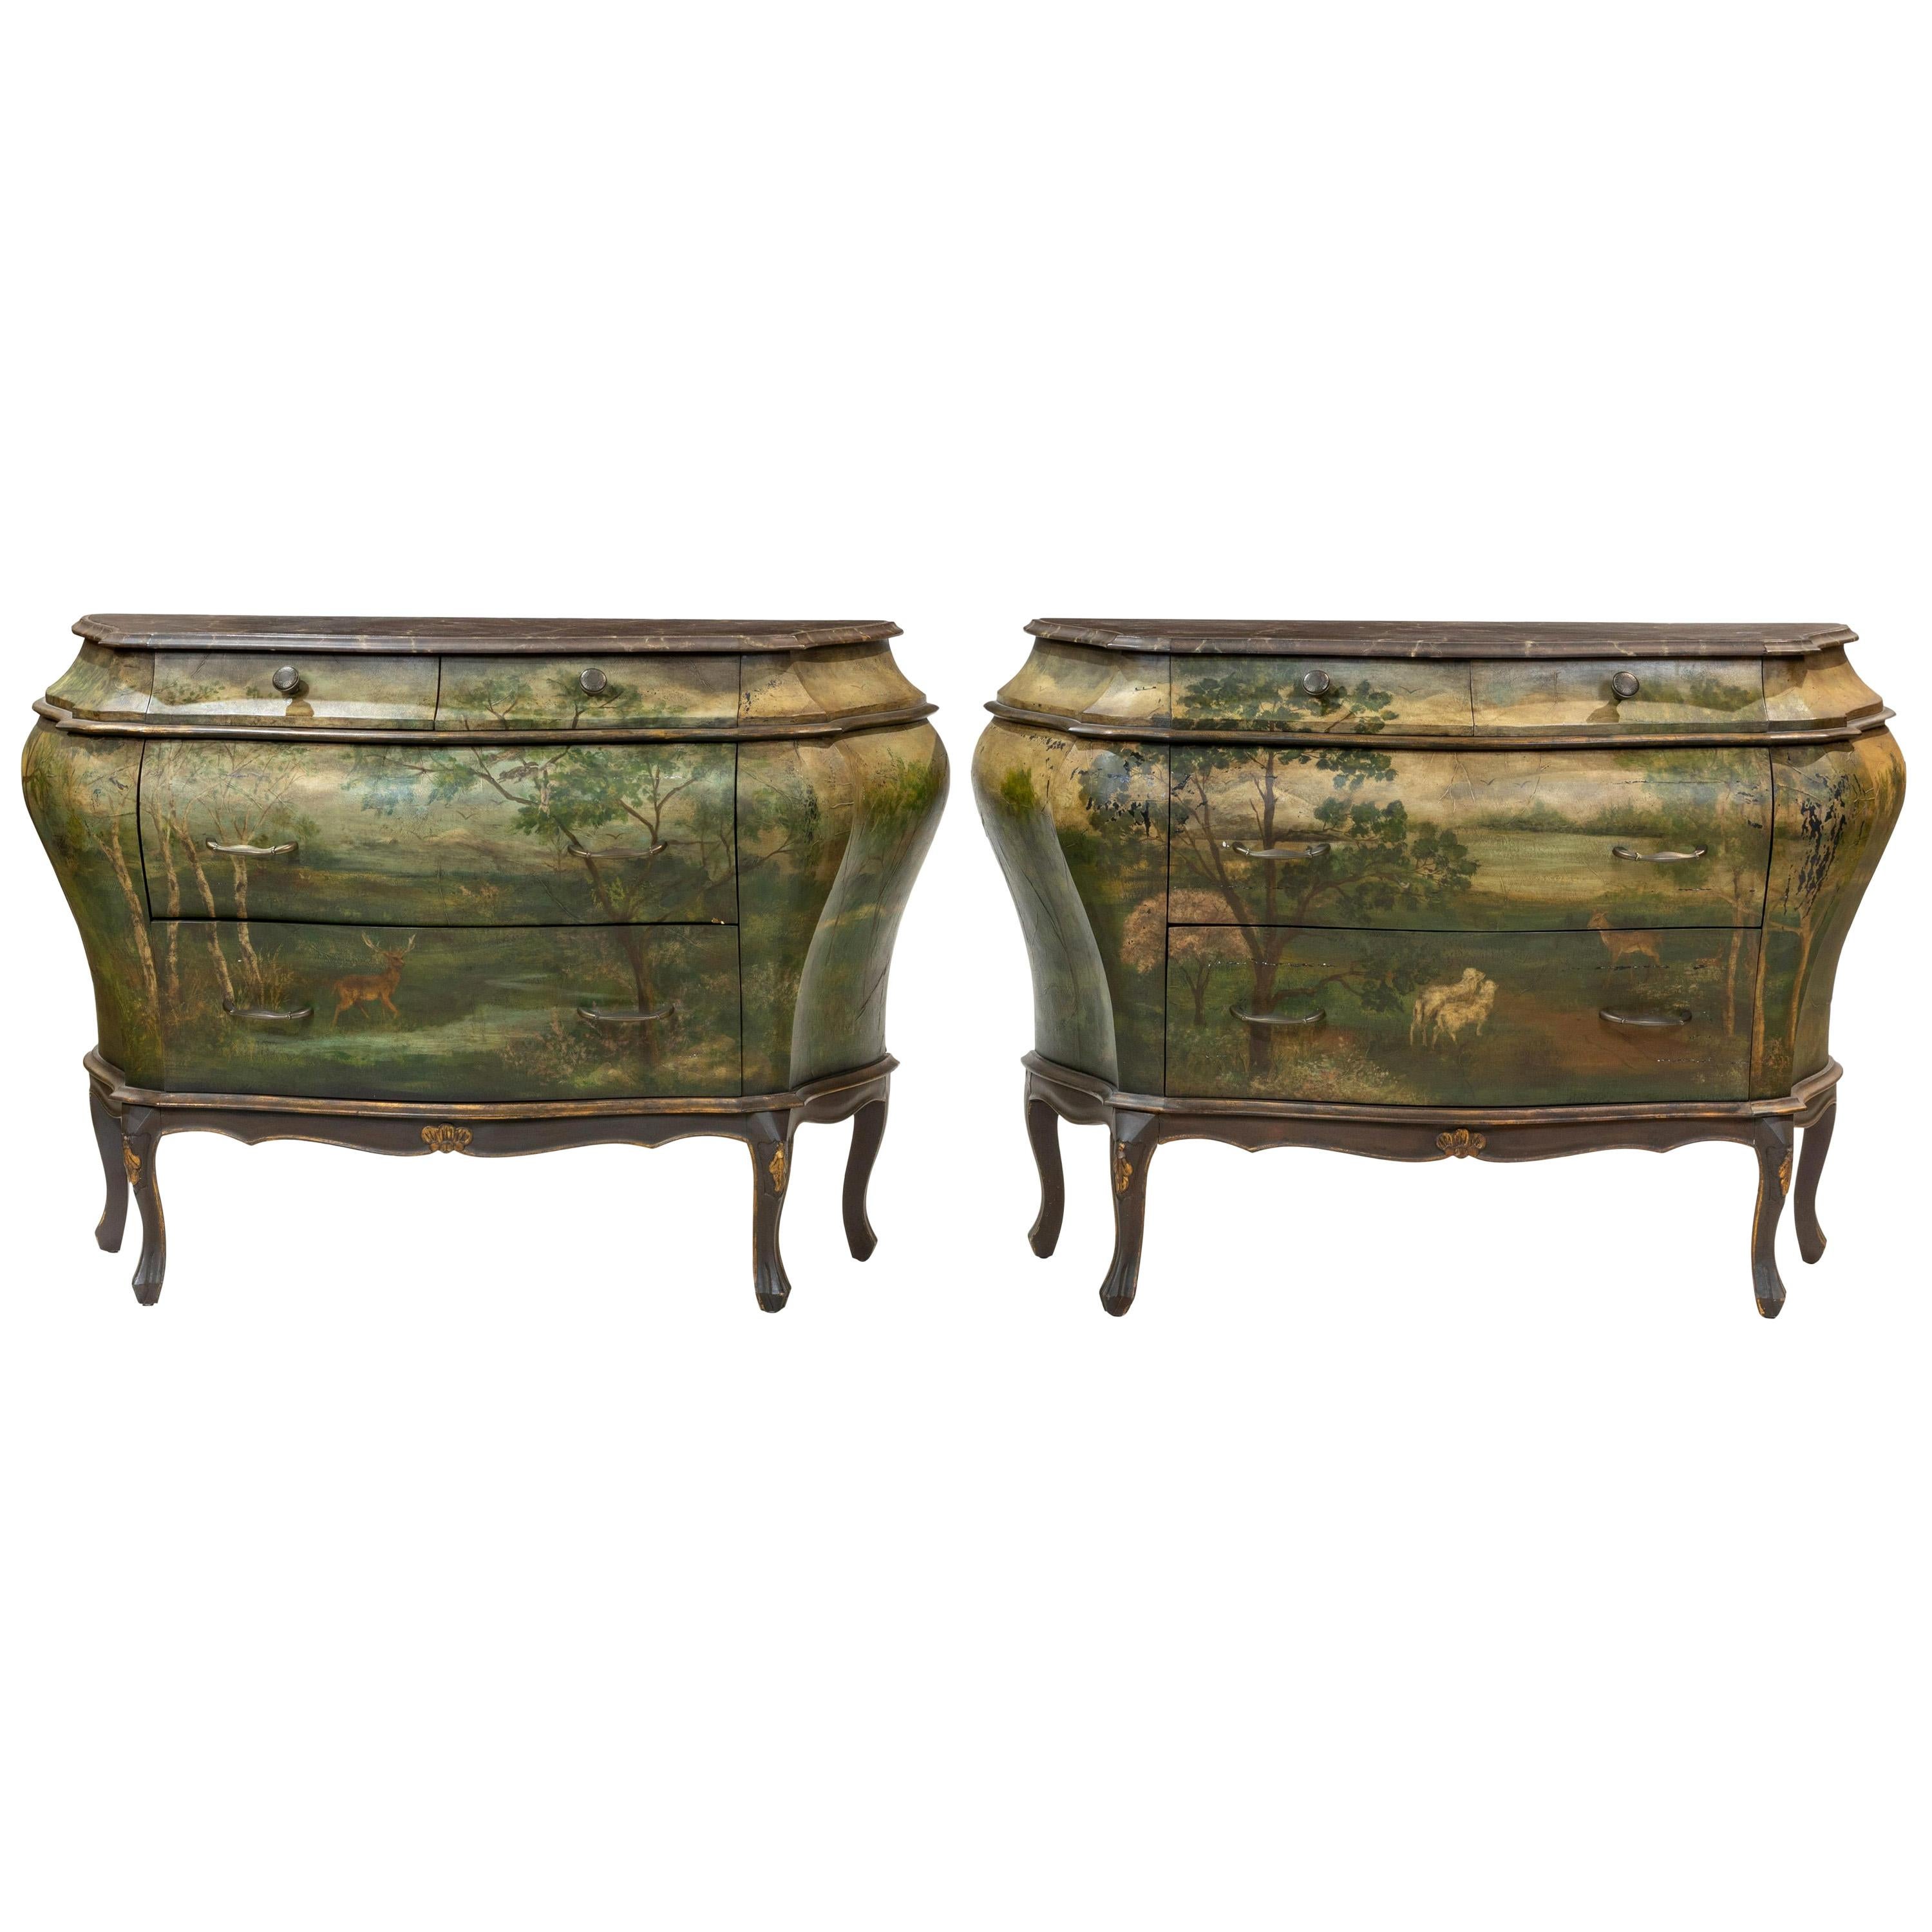 Pair of Italian Painted Faux Marble-Top Bombay Commodes or Nightstands